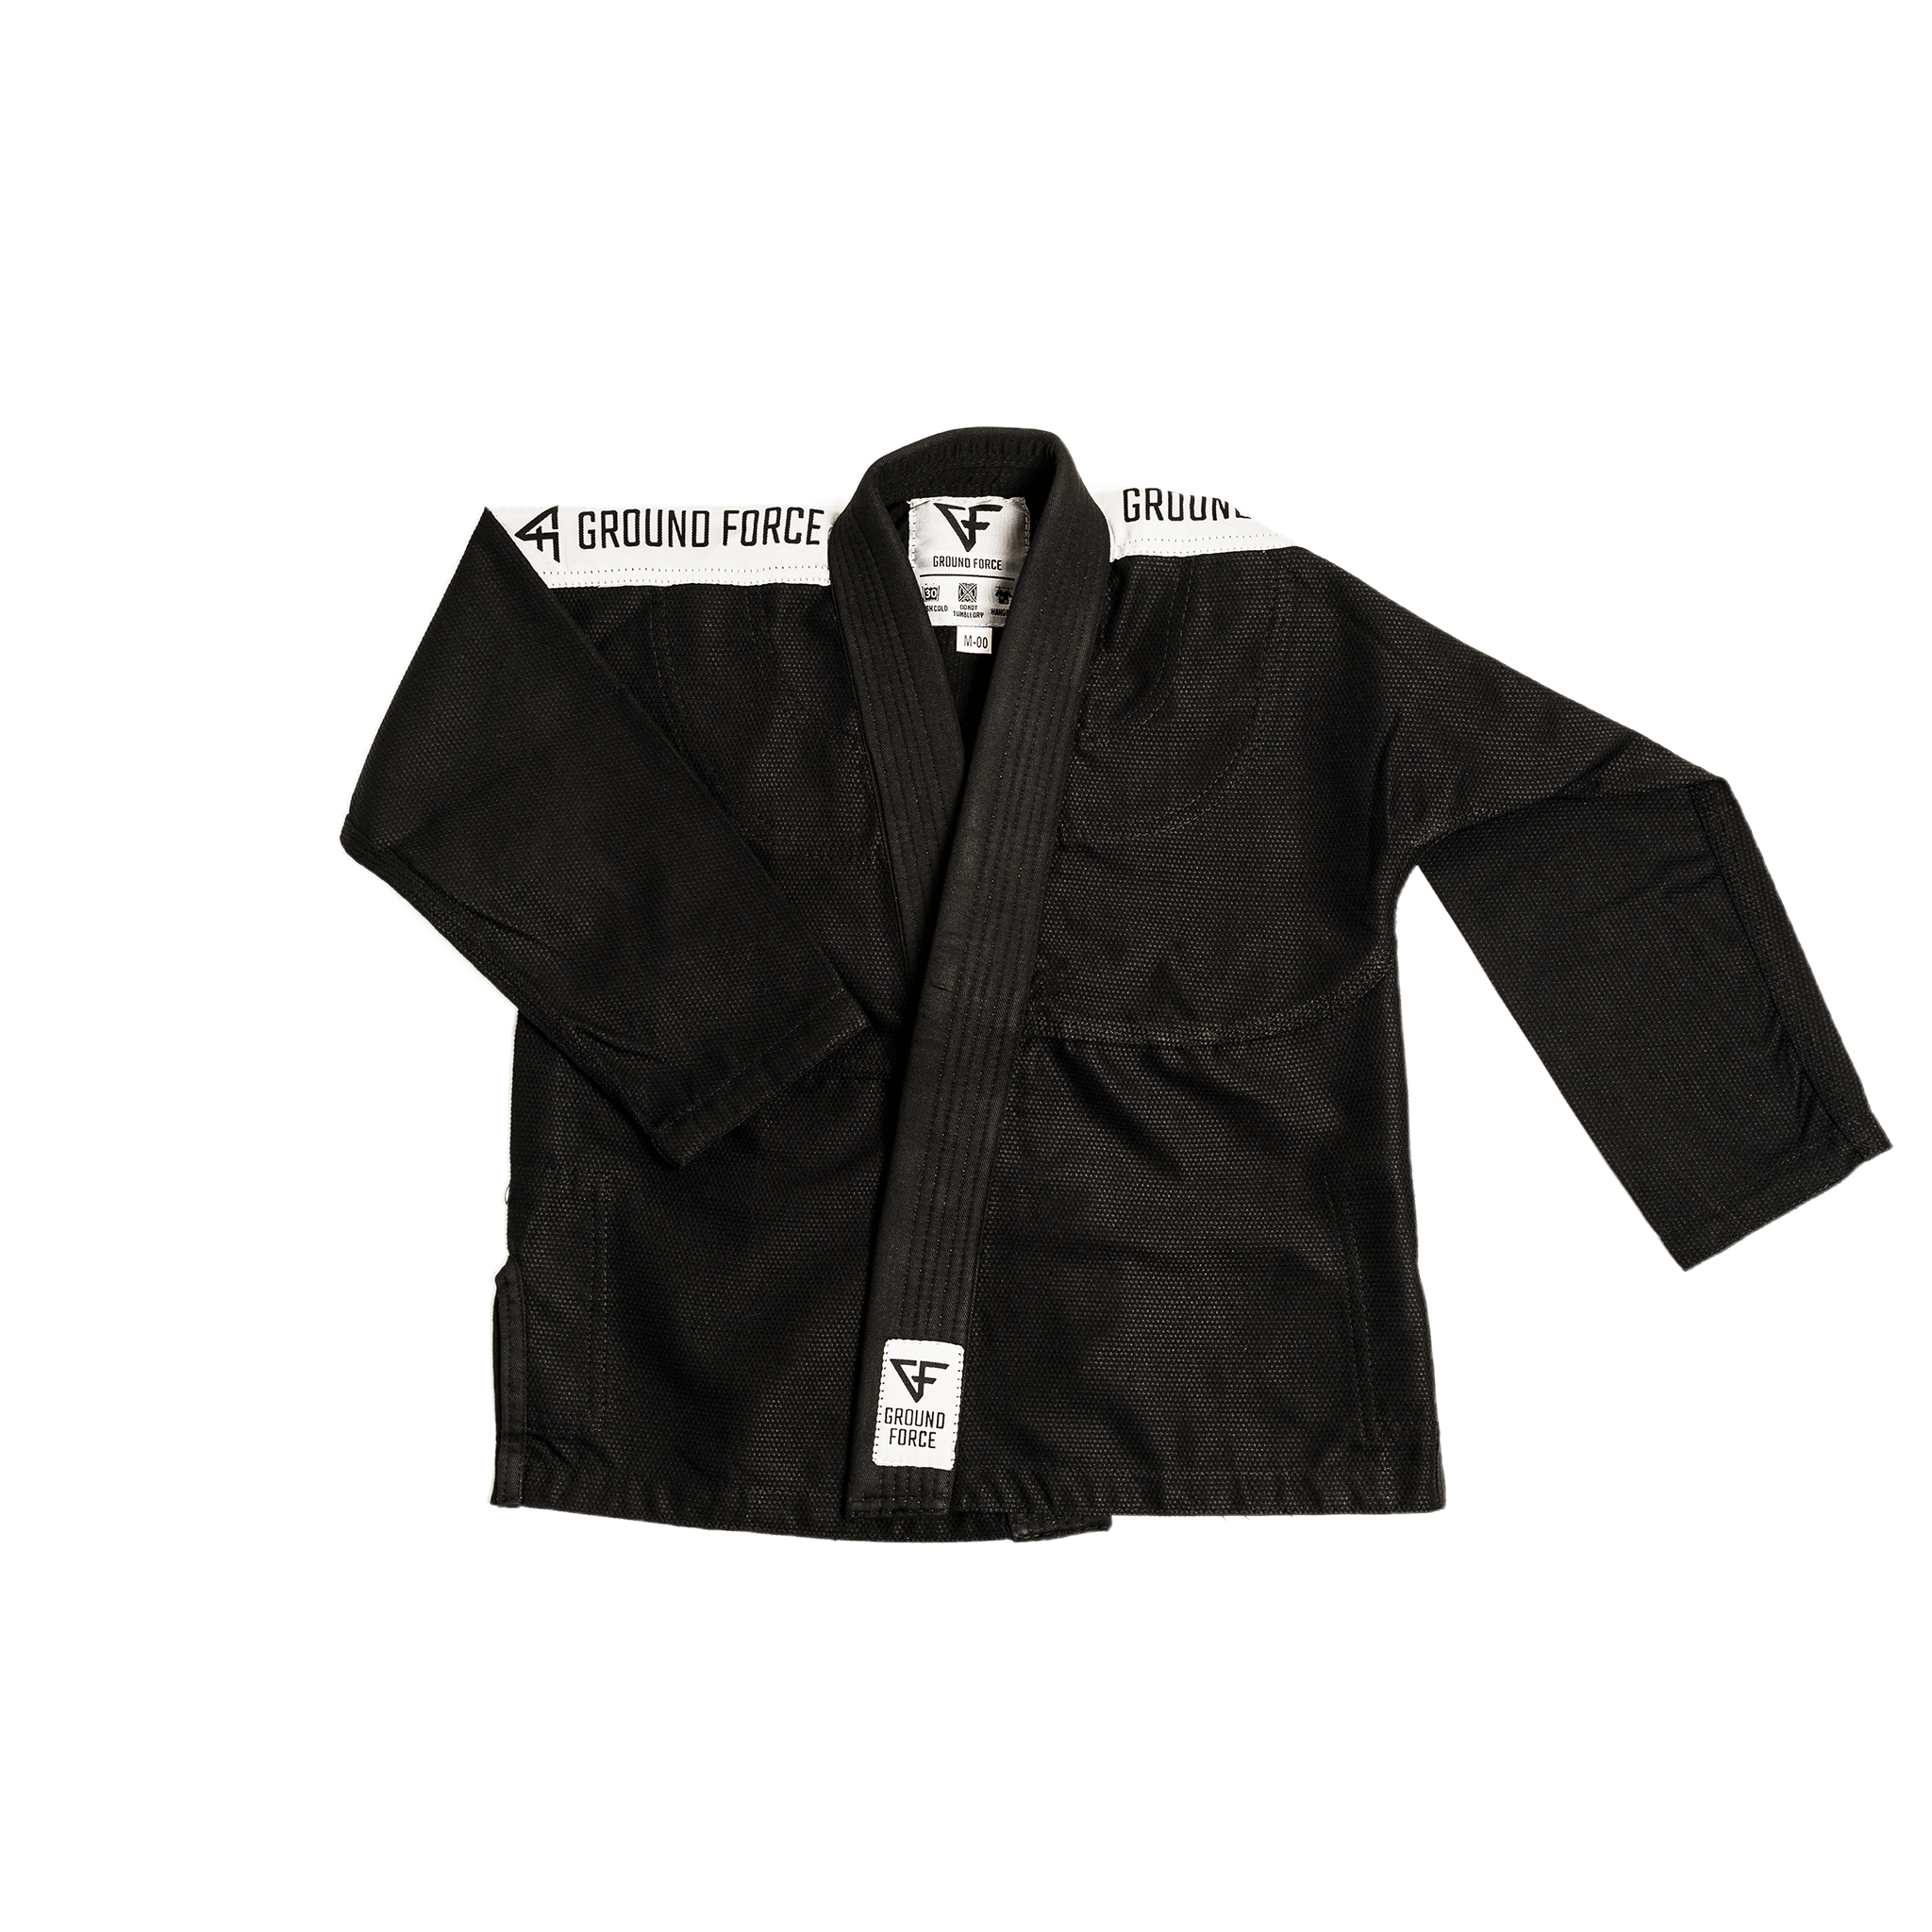 Best BJJ Gi for Beginners by Made4Fighters